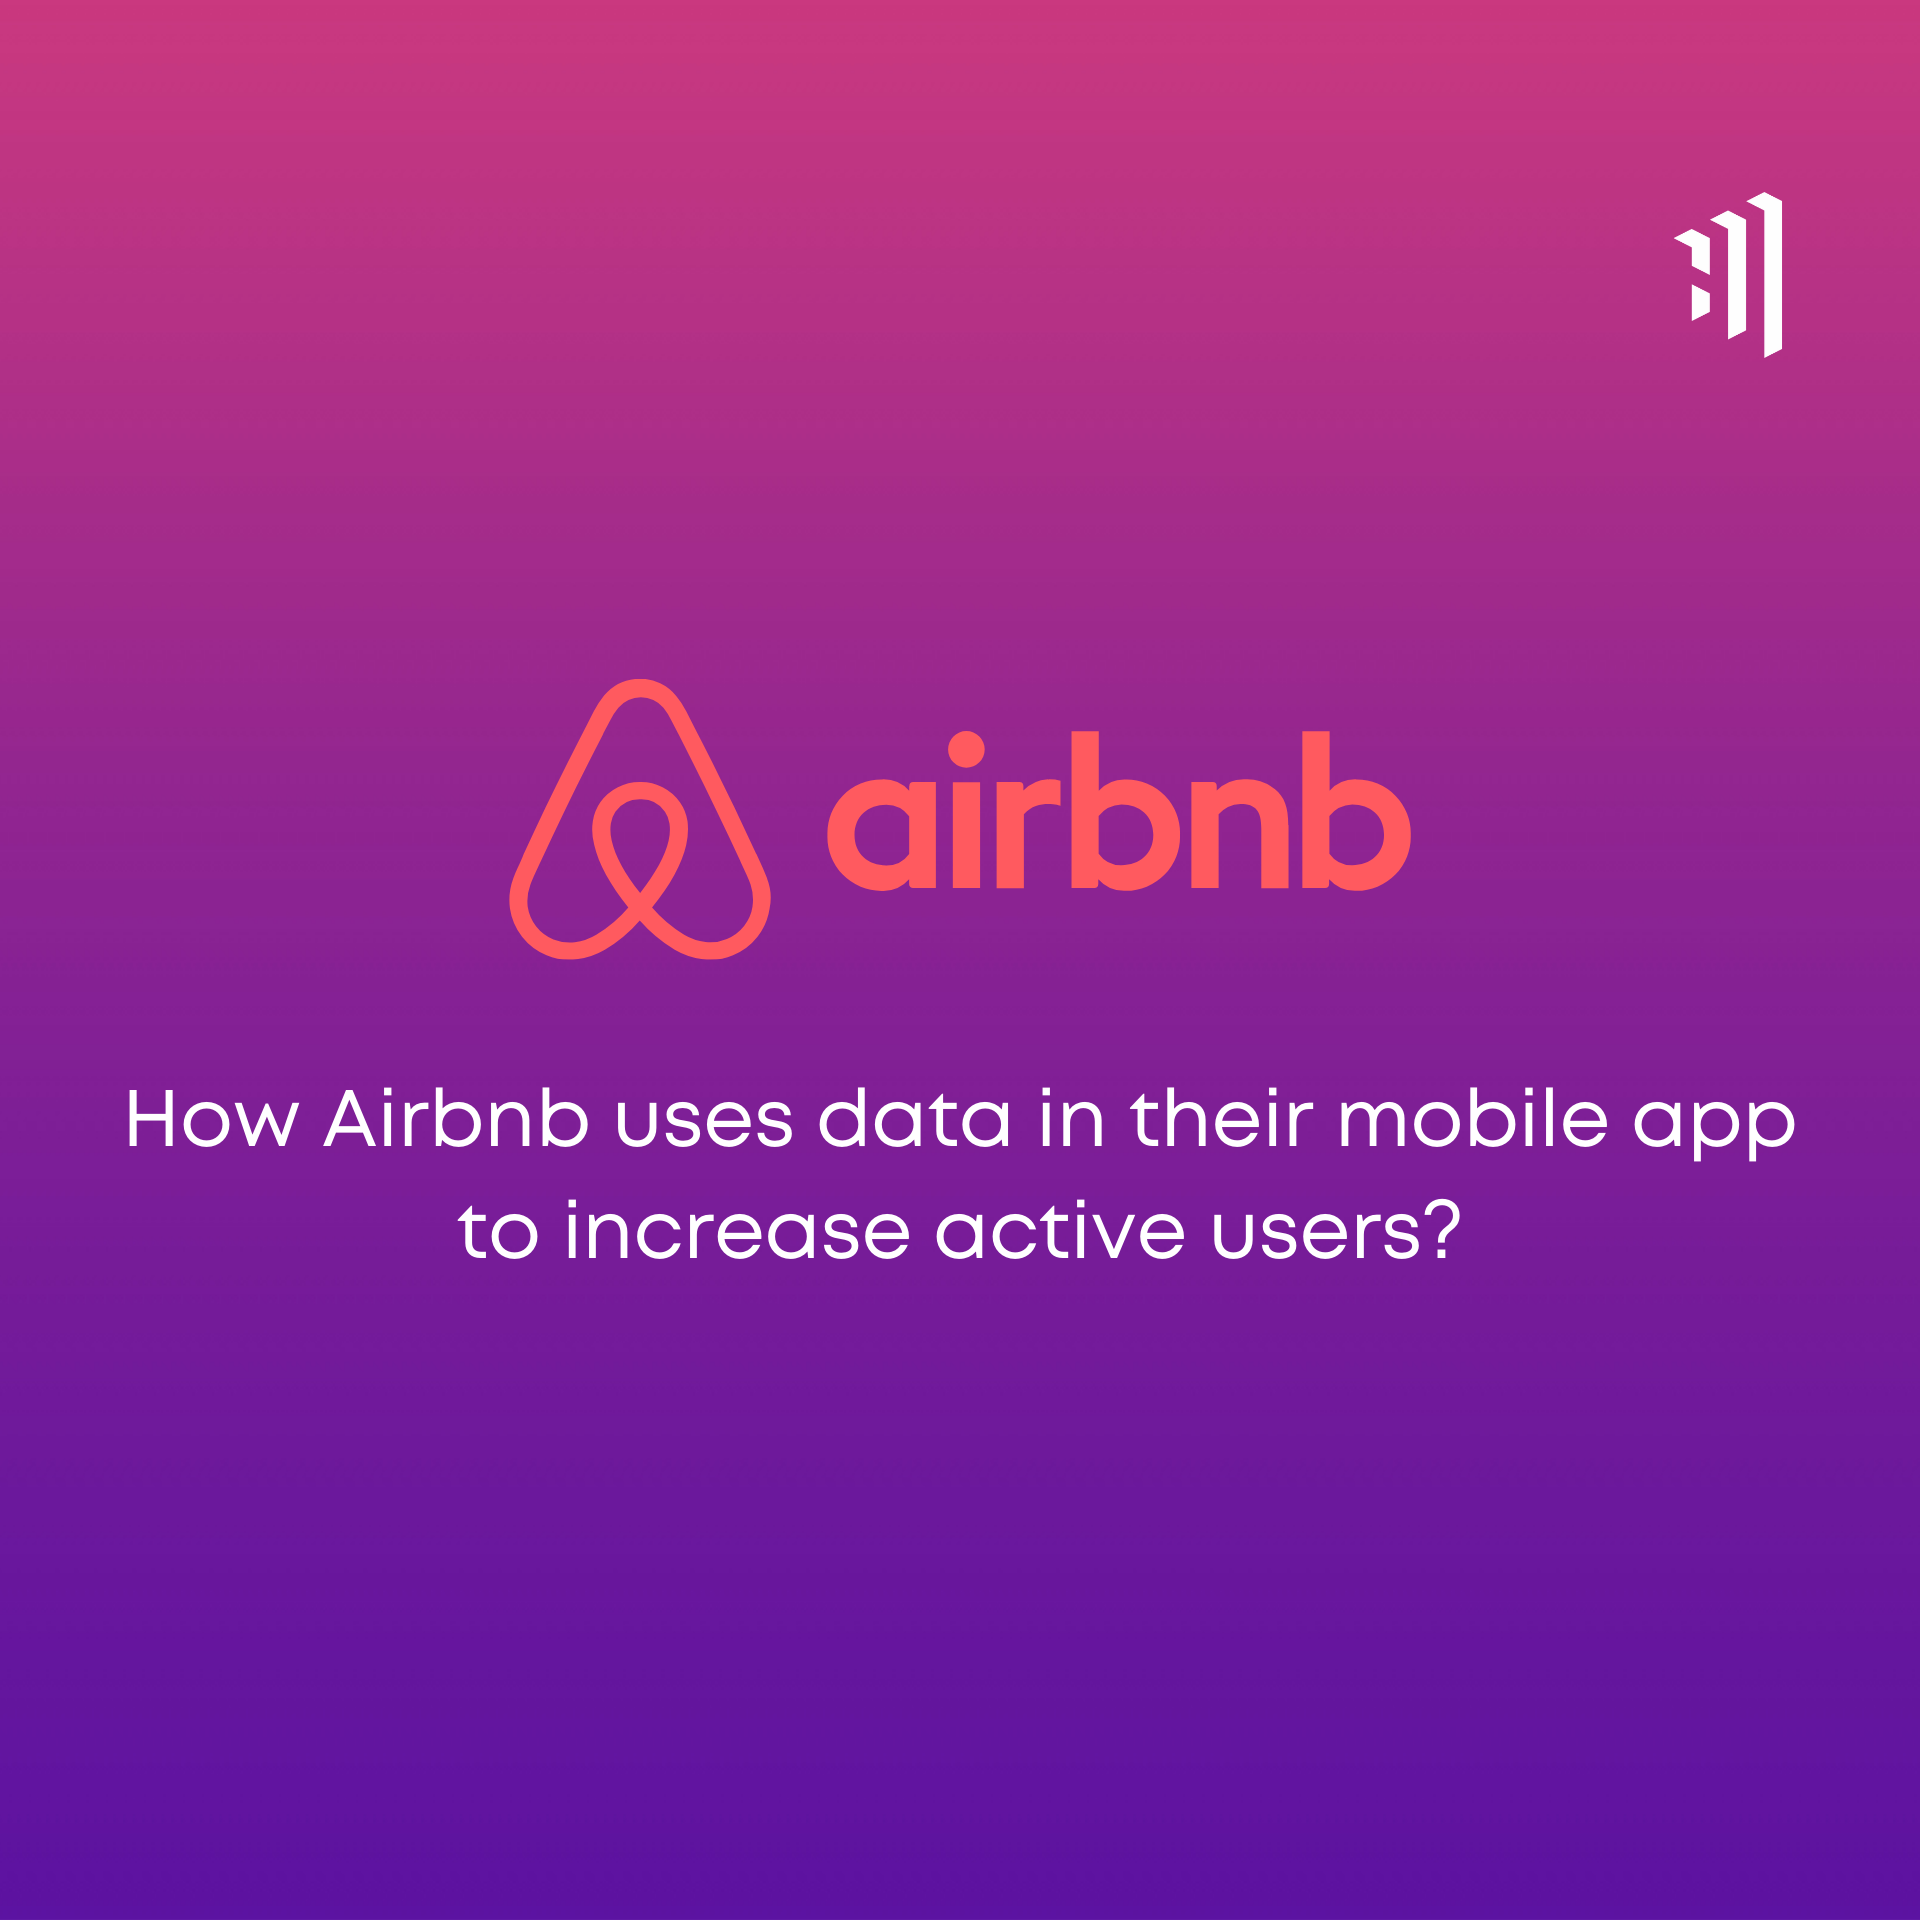 Digital Story: How Airbnb Uses Data in Their Mobile App to Increase Active Users?